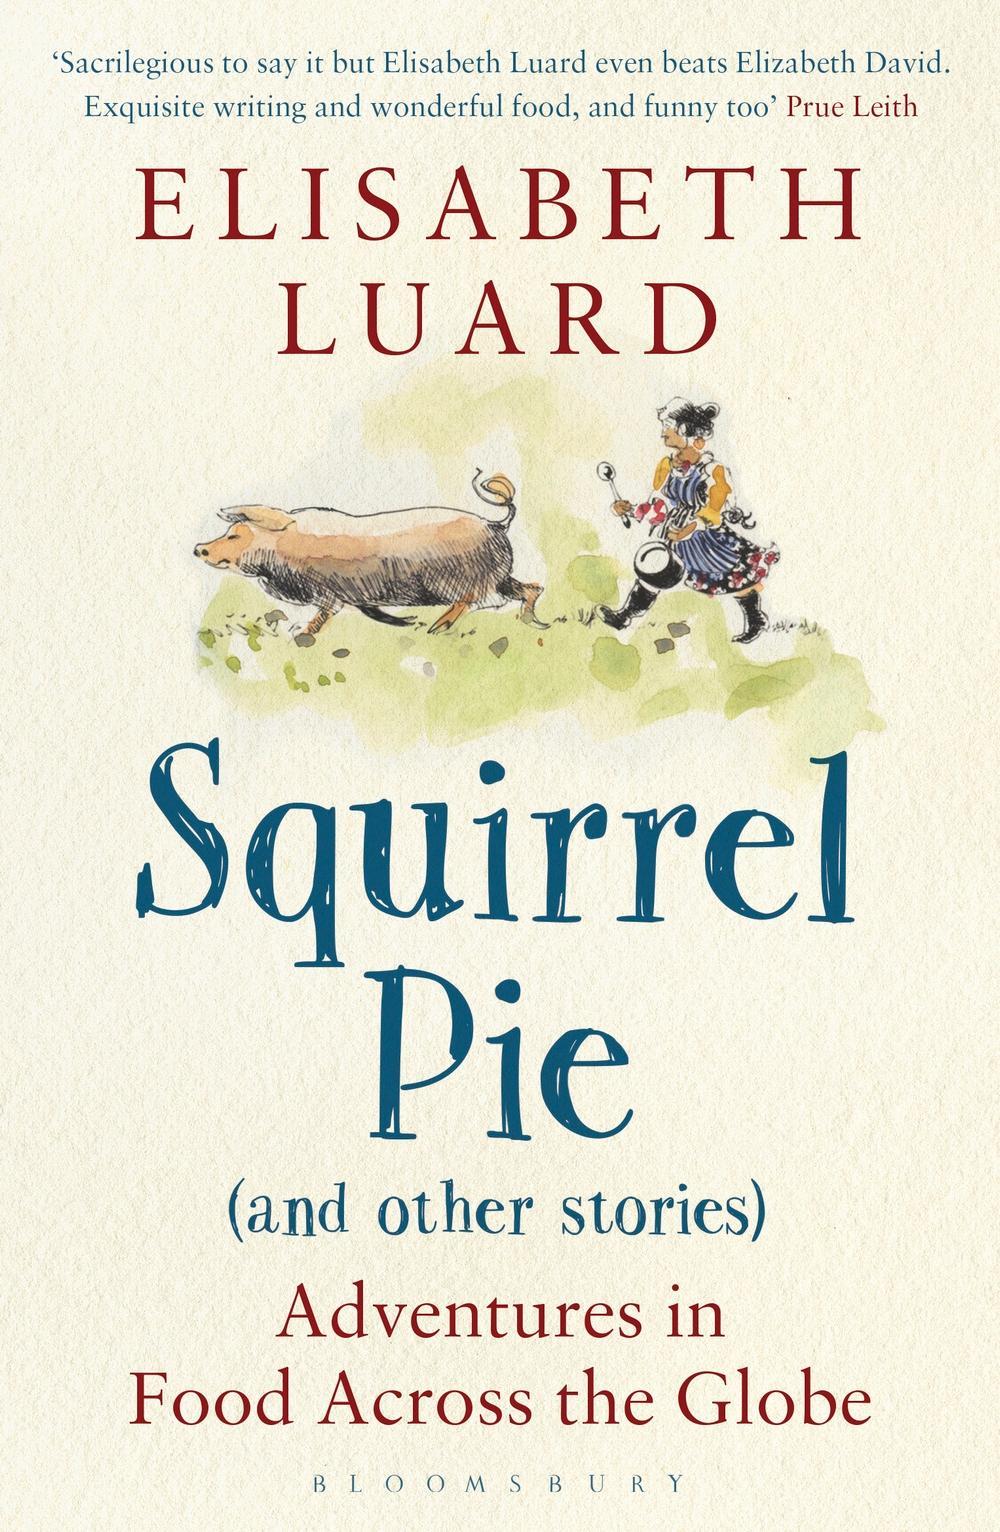 Squirrel Pie and other stories